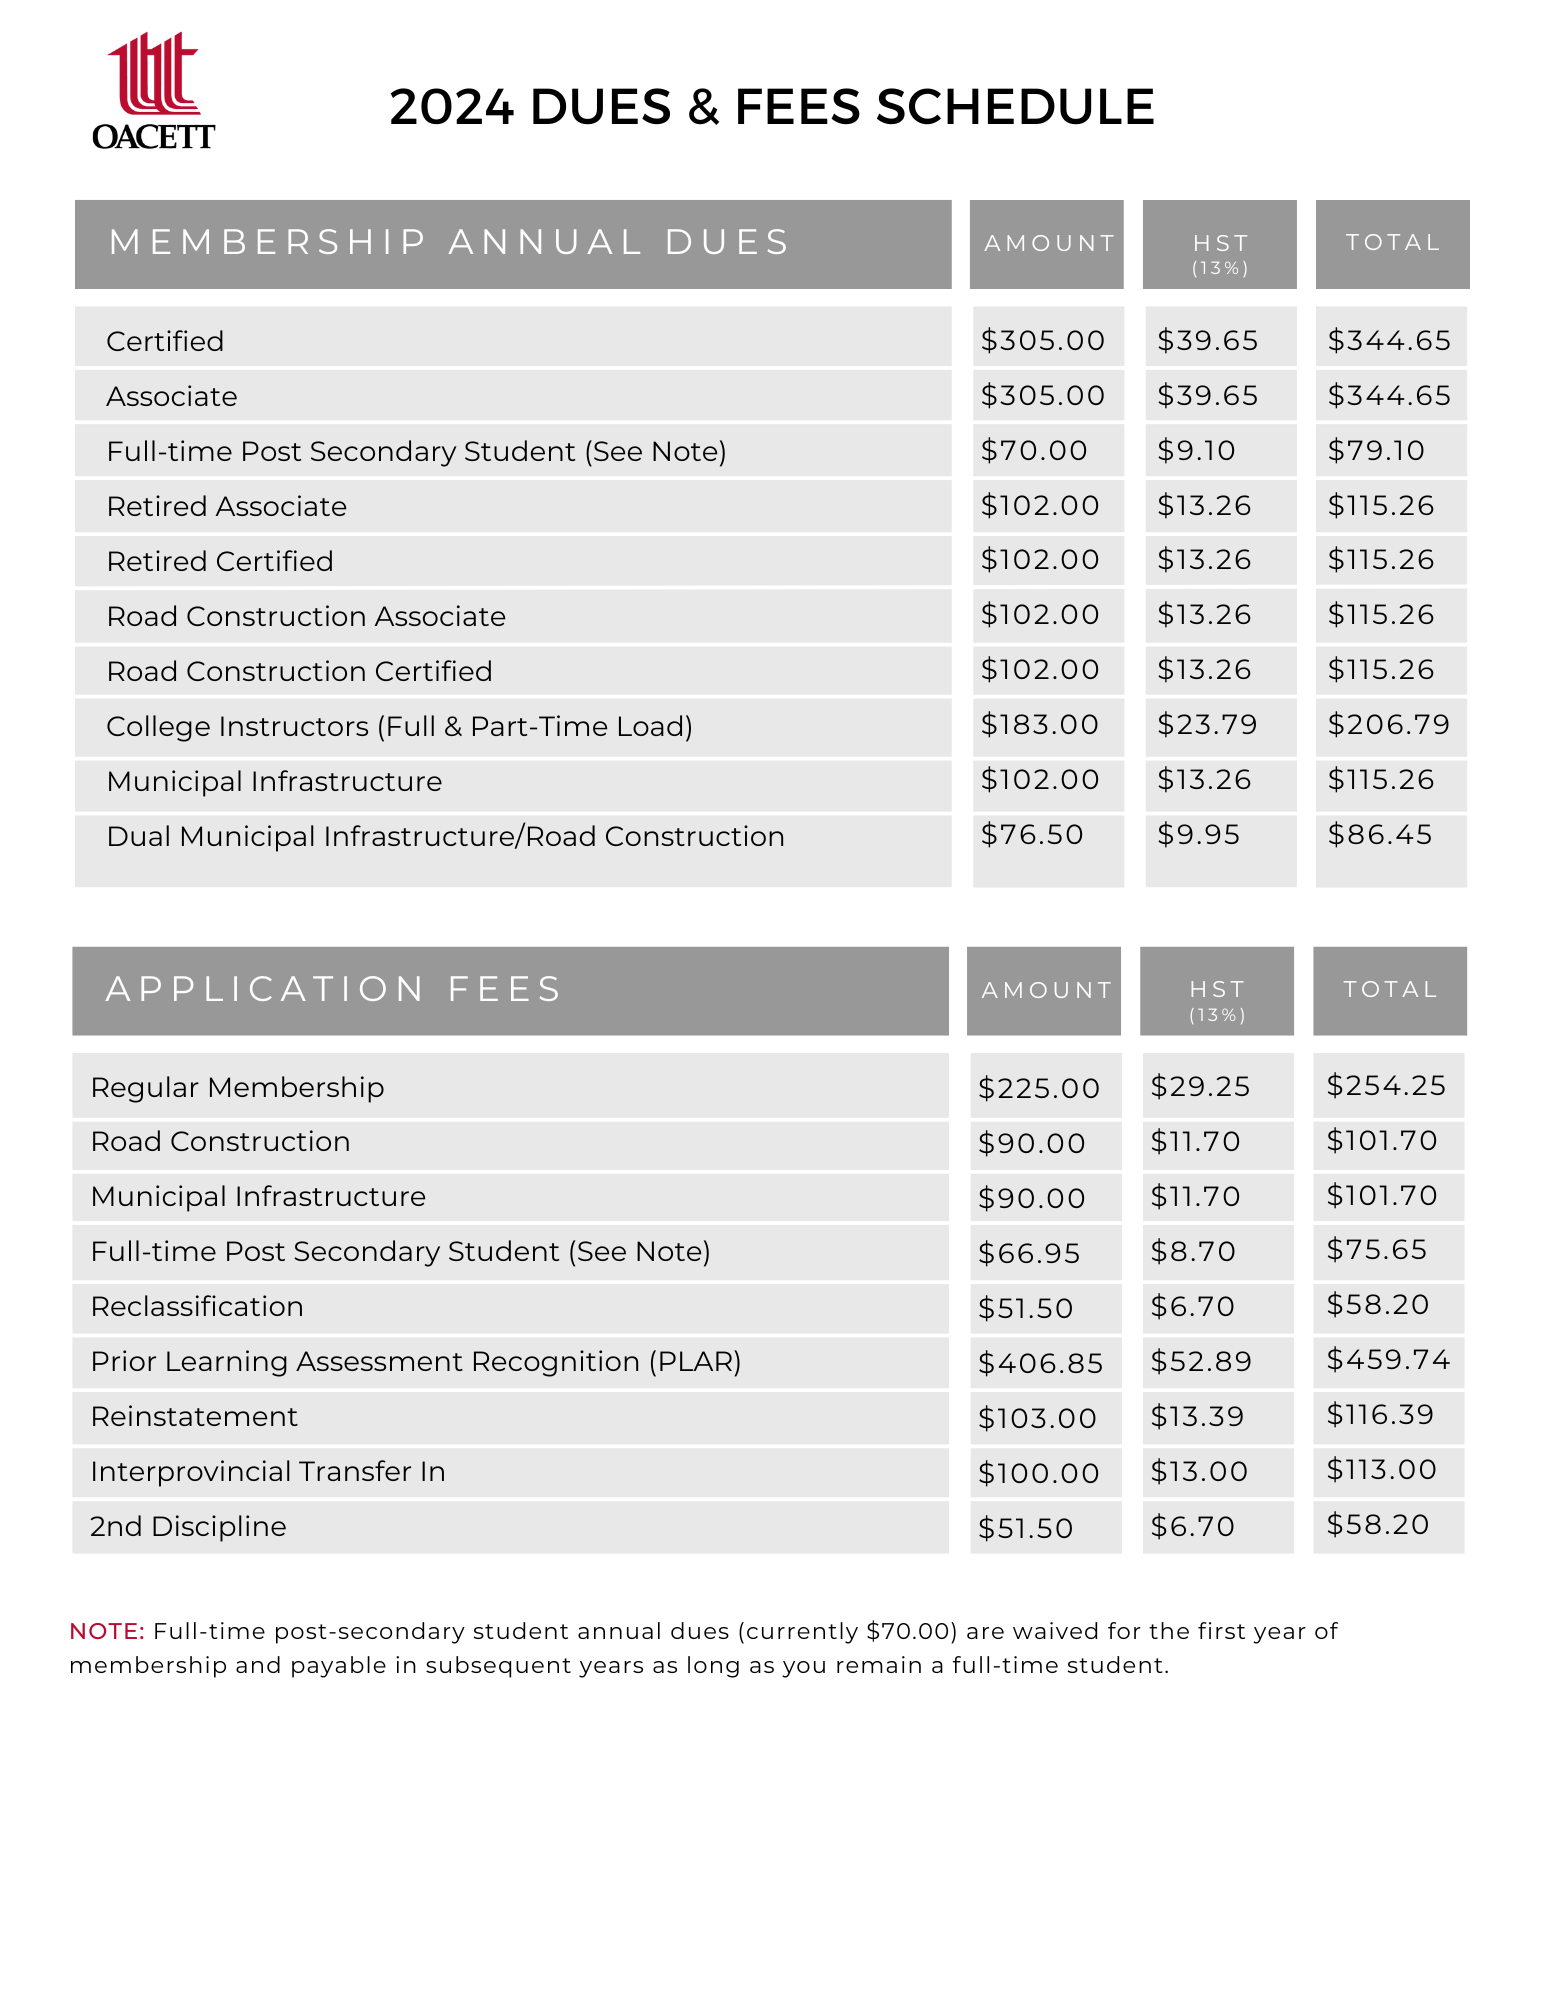 2023 Dues and Fees Schedule Page 1/3